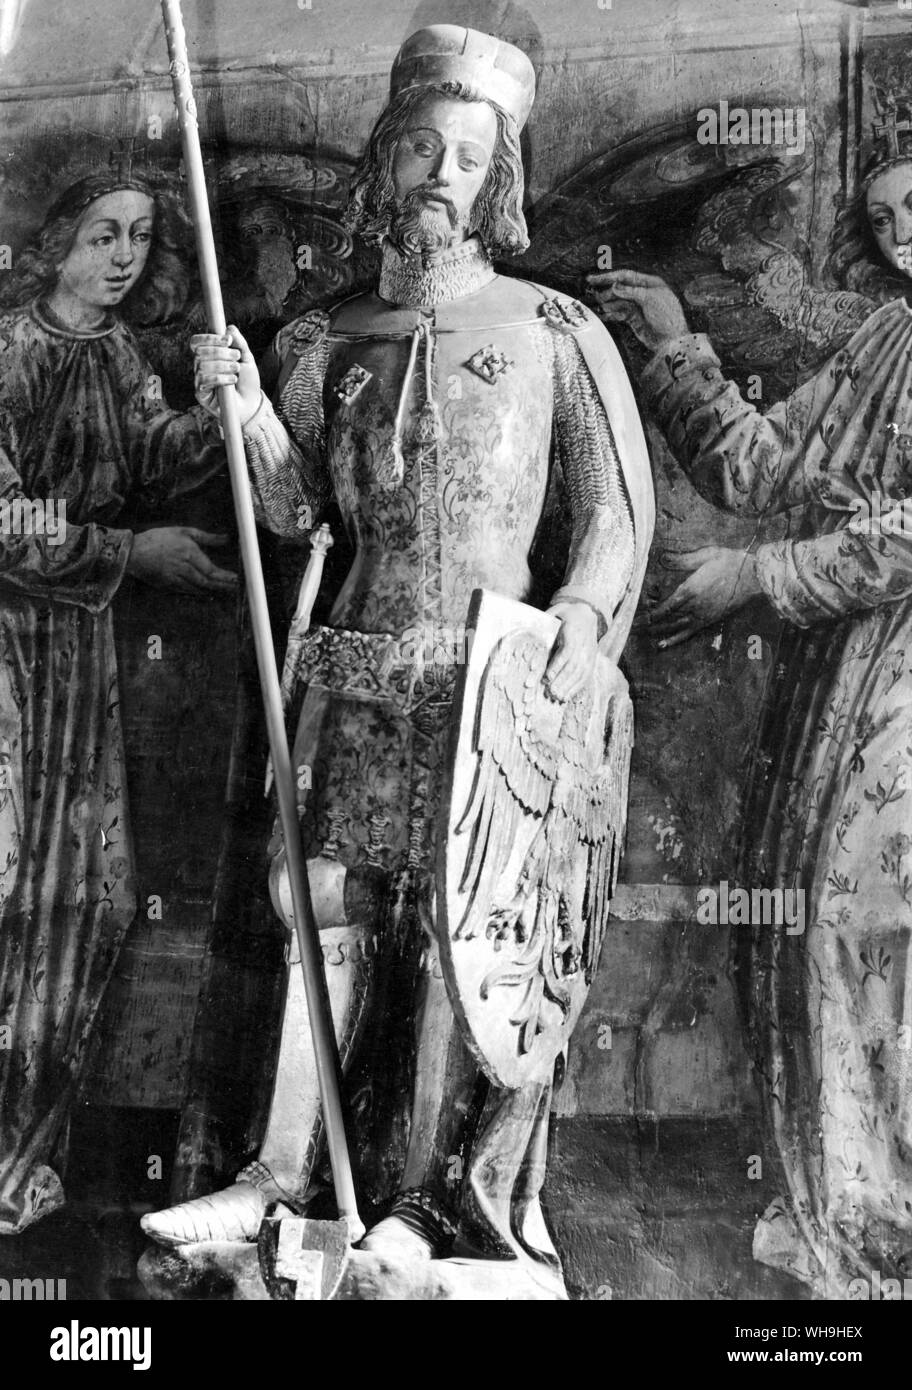 14th century scuplture of St. Wenceslas (c.907-929), Duke of Bohemia who attempted to christianize his people and was murdered by his brother. He is the patron saint of the Czech Republic and the 'Good King Wenceslas' in the popular carol. Feast day is 28th September. Stock Photo